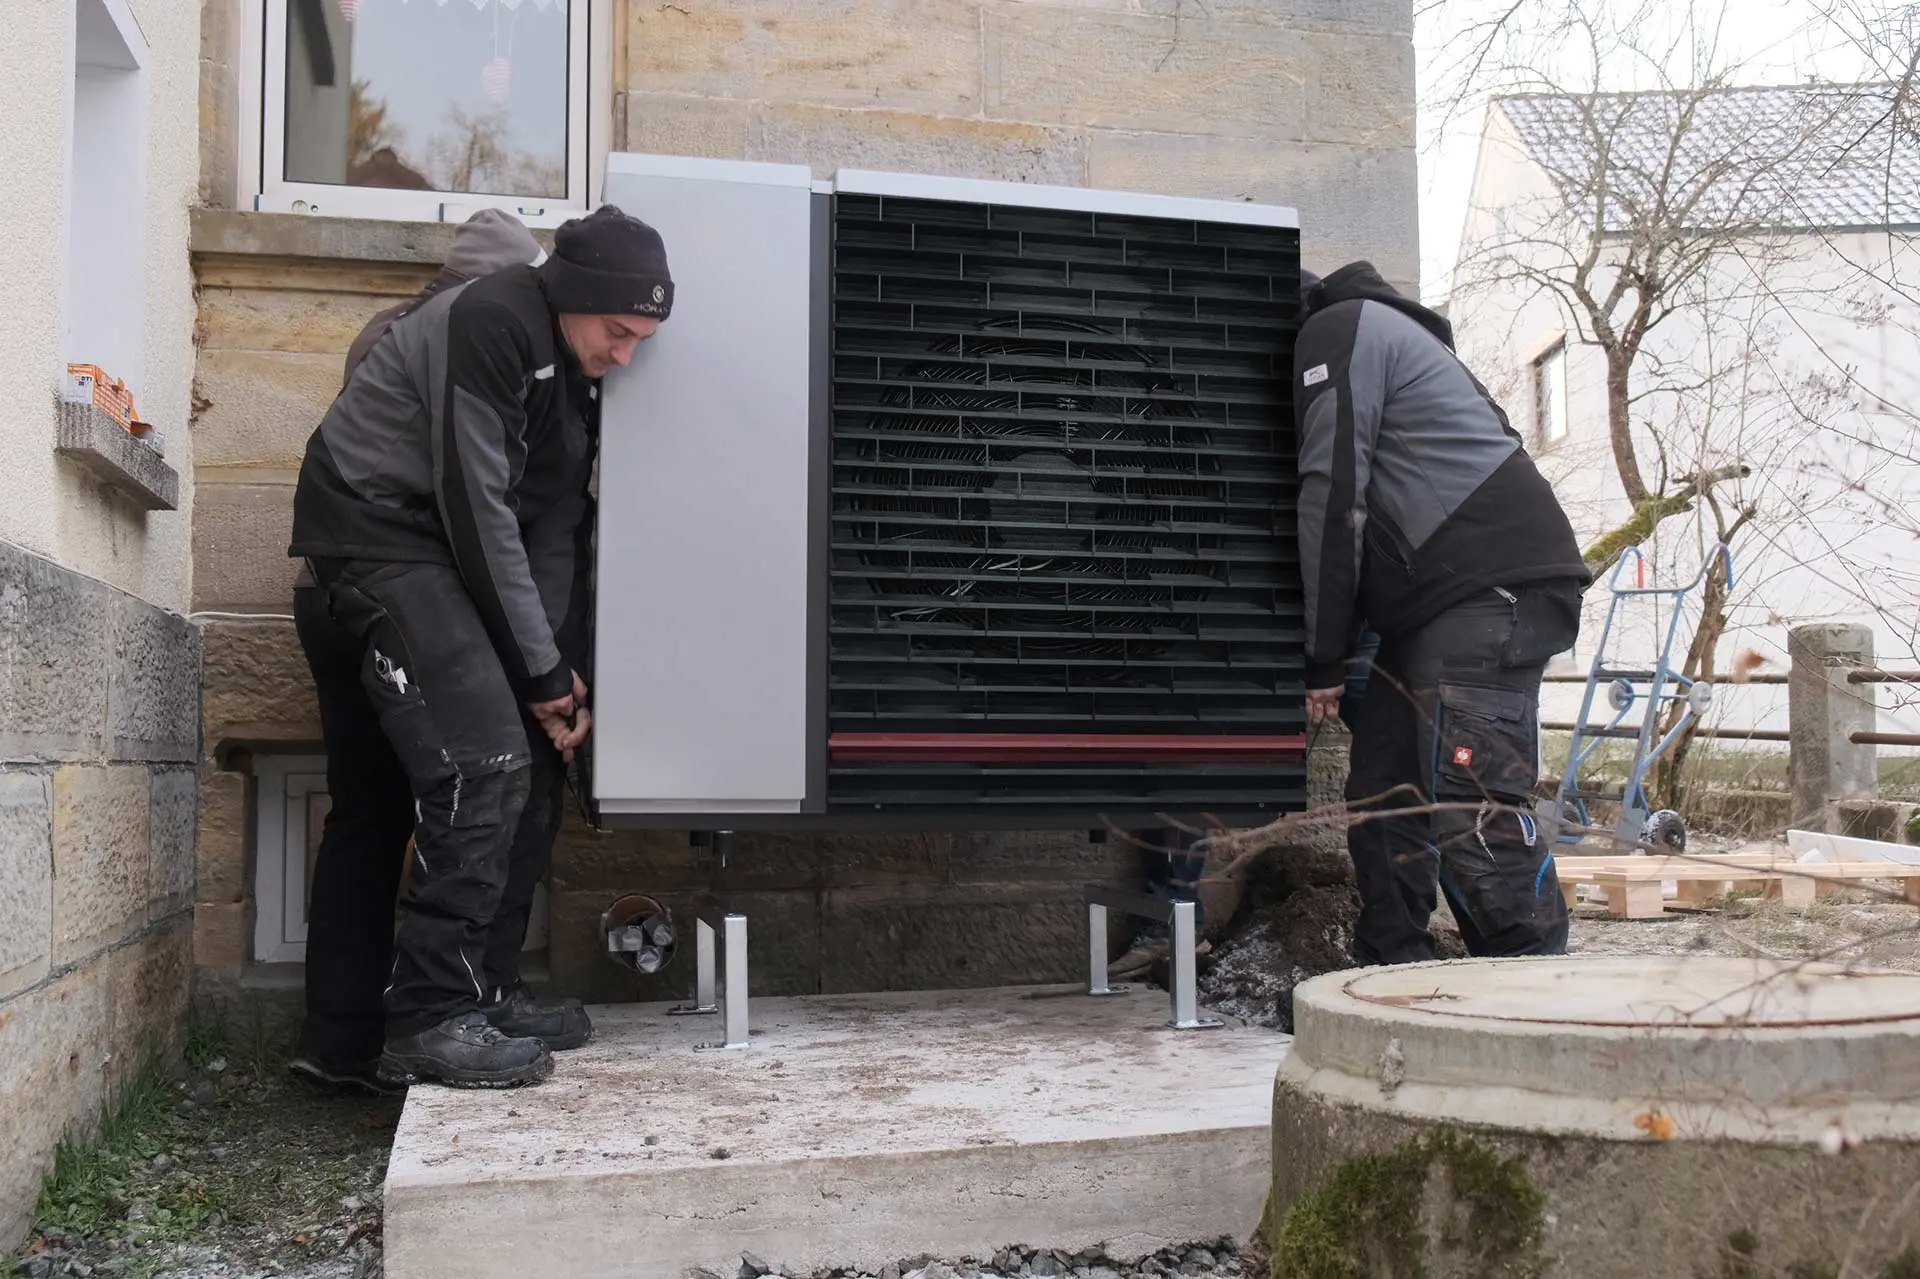 An old heating system is replaced by two installers with a Hybrox air source heat pump from alpha innotec